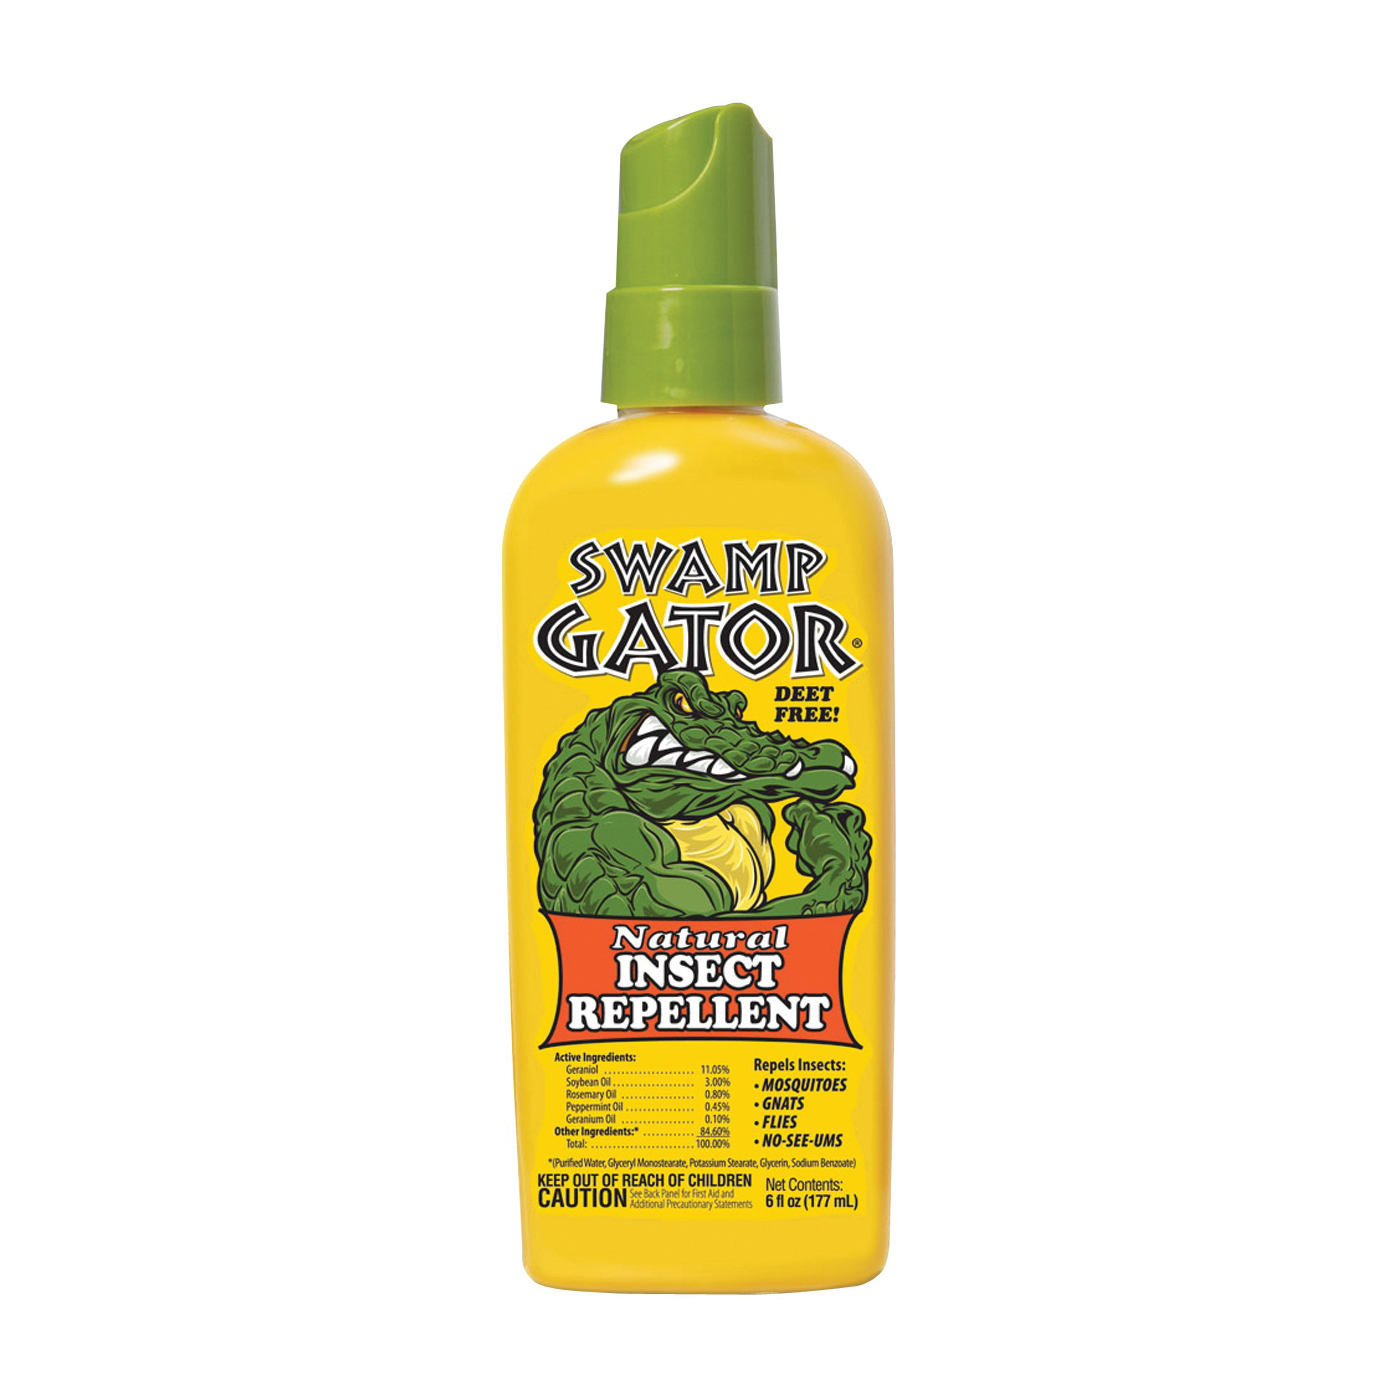 Swamp Gator HSG-6 Insect Repellent, 6 oz, Liquid, Milky, Minty